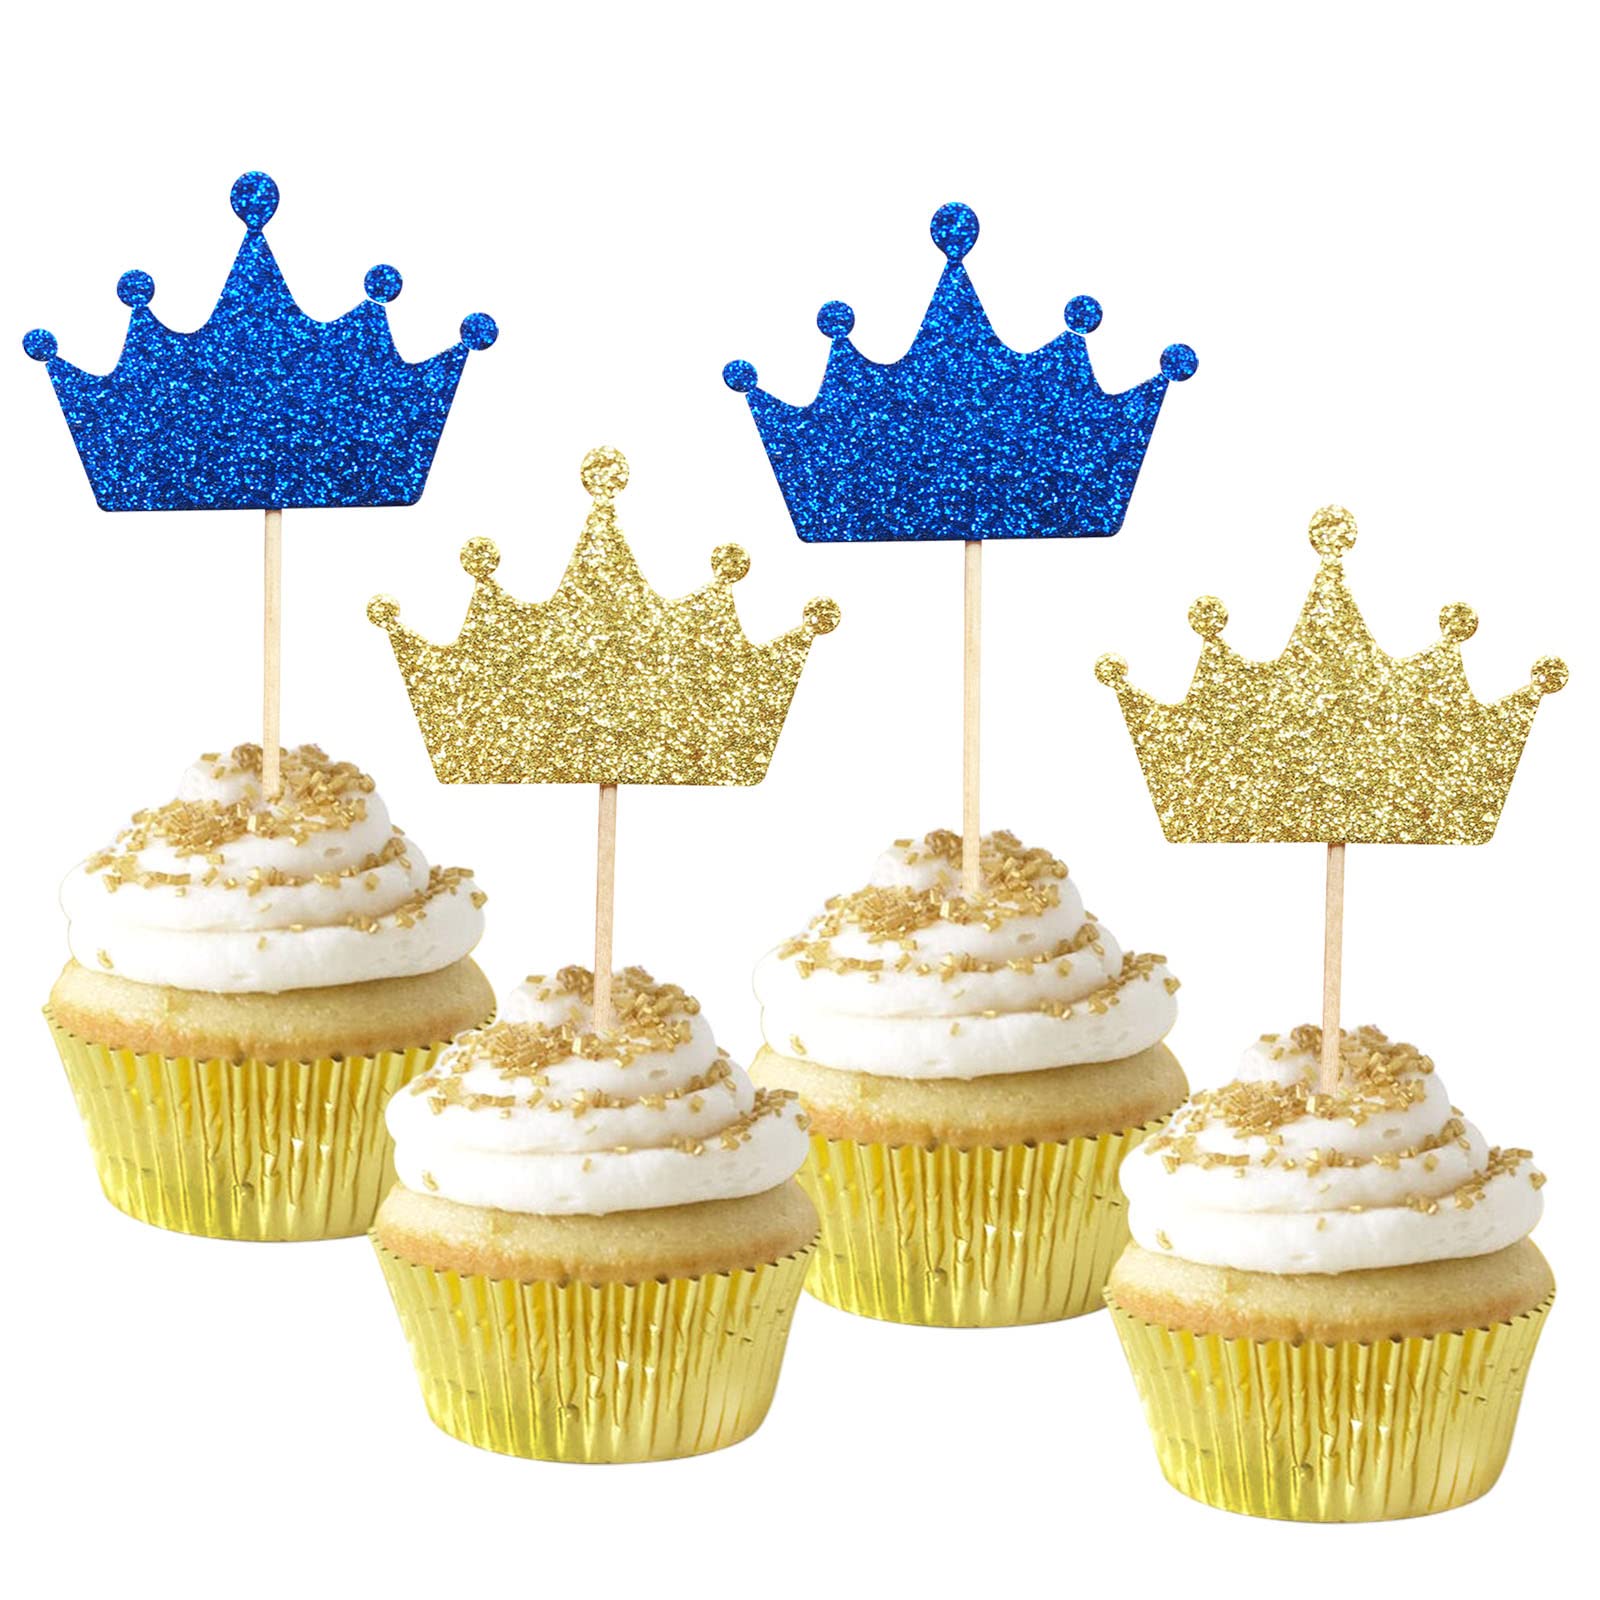 Book Cover 36-Pack Gold and Royal Blue Crown Cupcake Toppers Picks, Royal Baby Shower Birthday Party Decorations Supplies (blue)